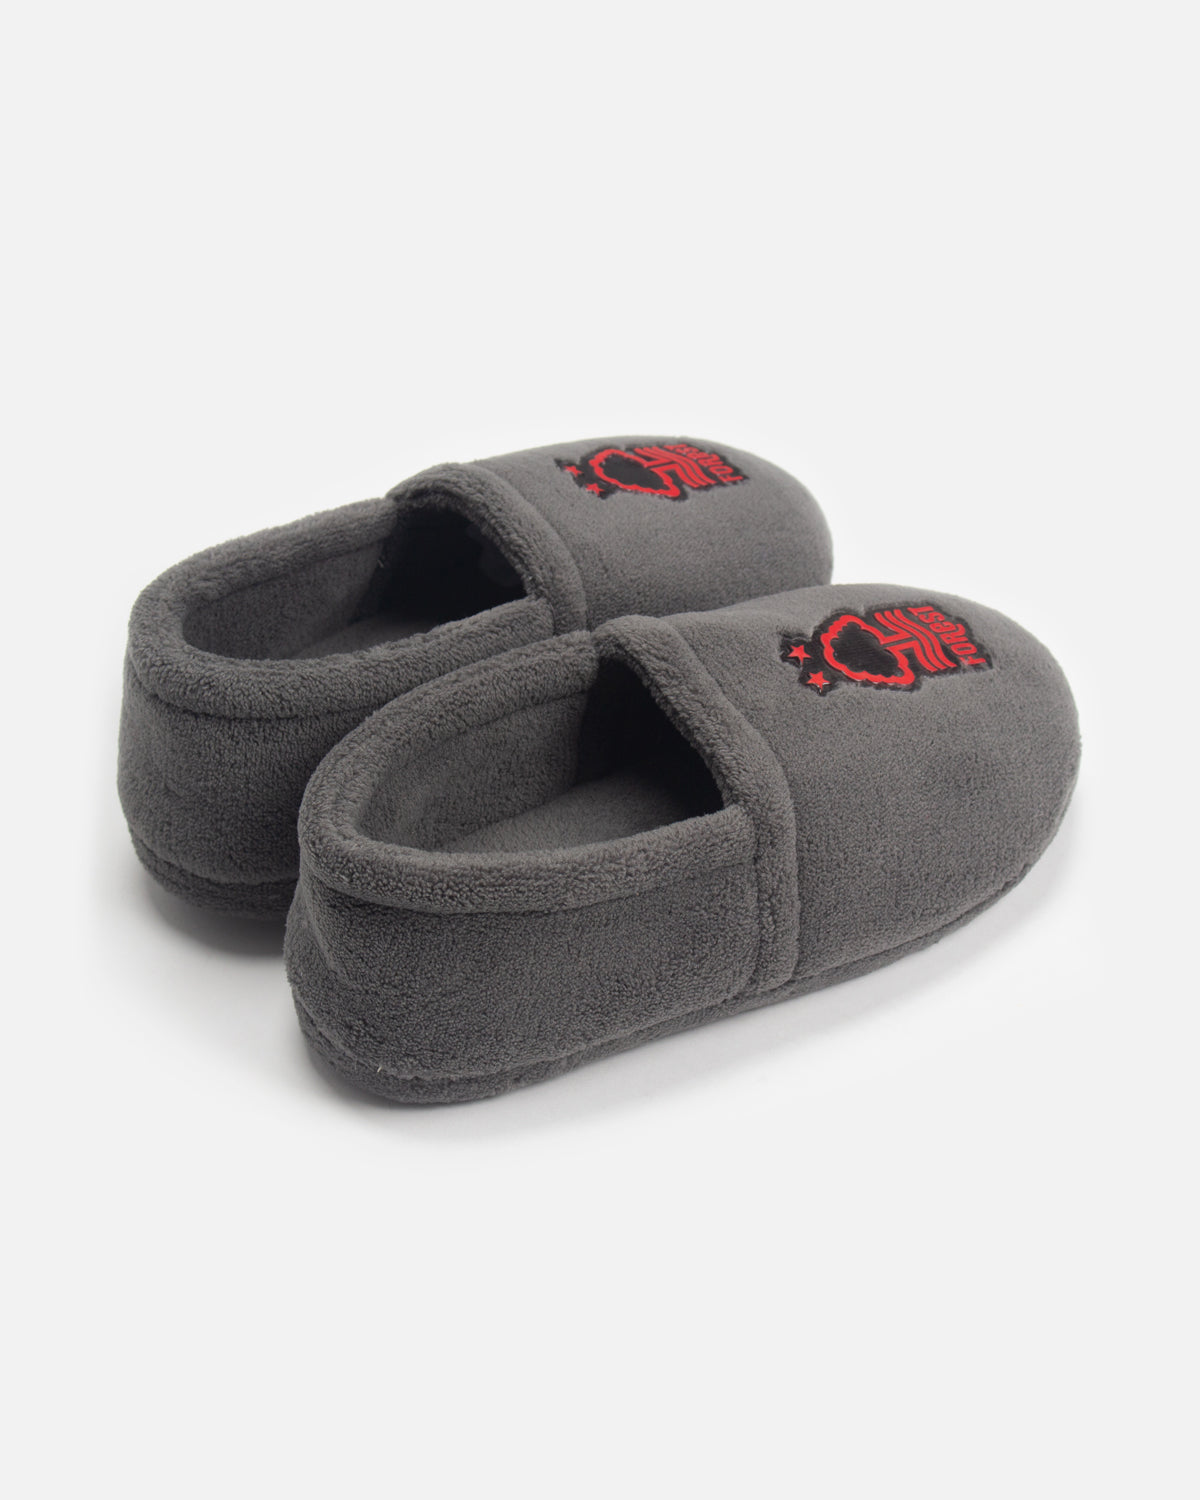 NFFC Junior Charcoal Slippers